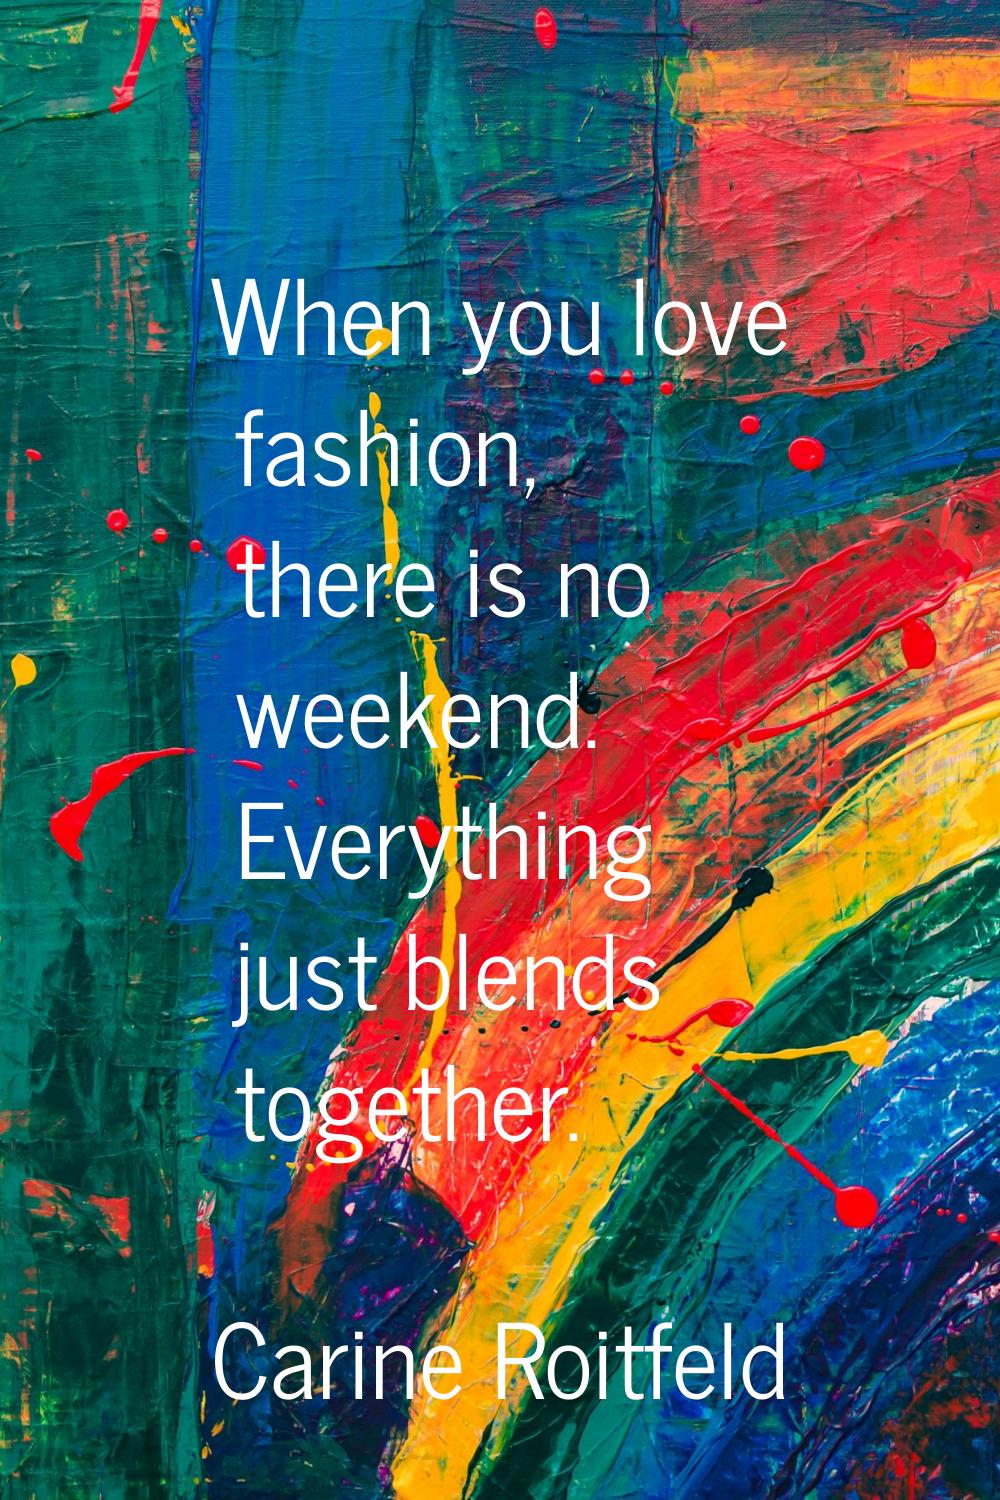 When you love fashion, there is no weekend. Everything just blends together.